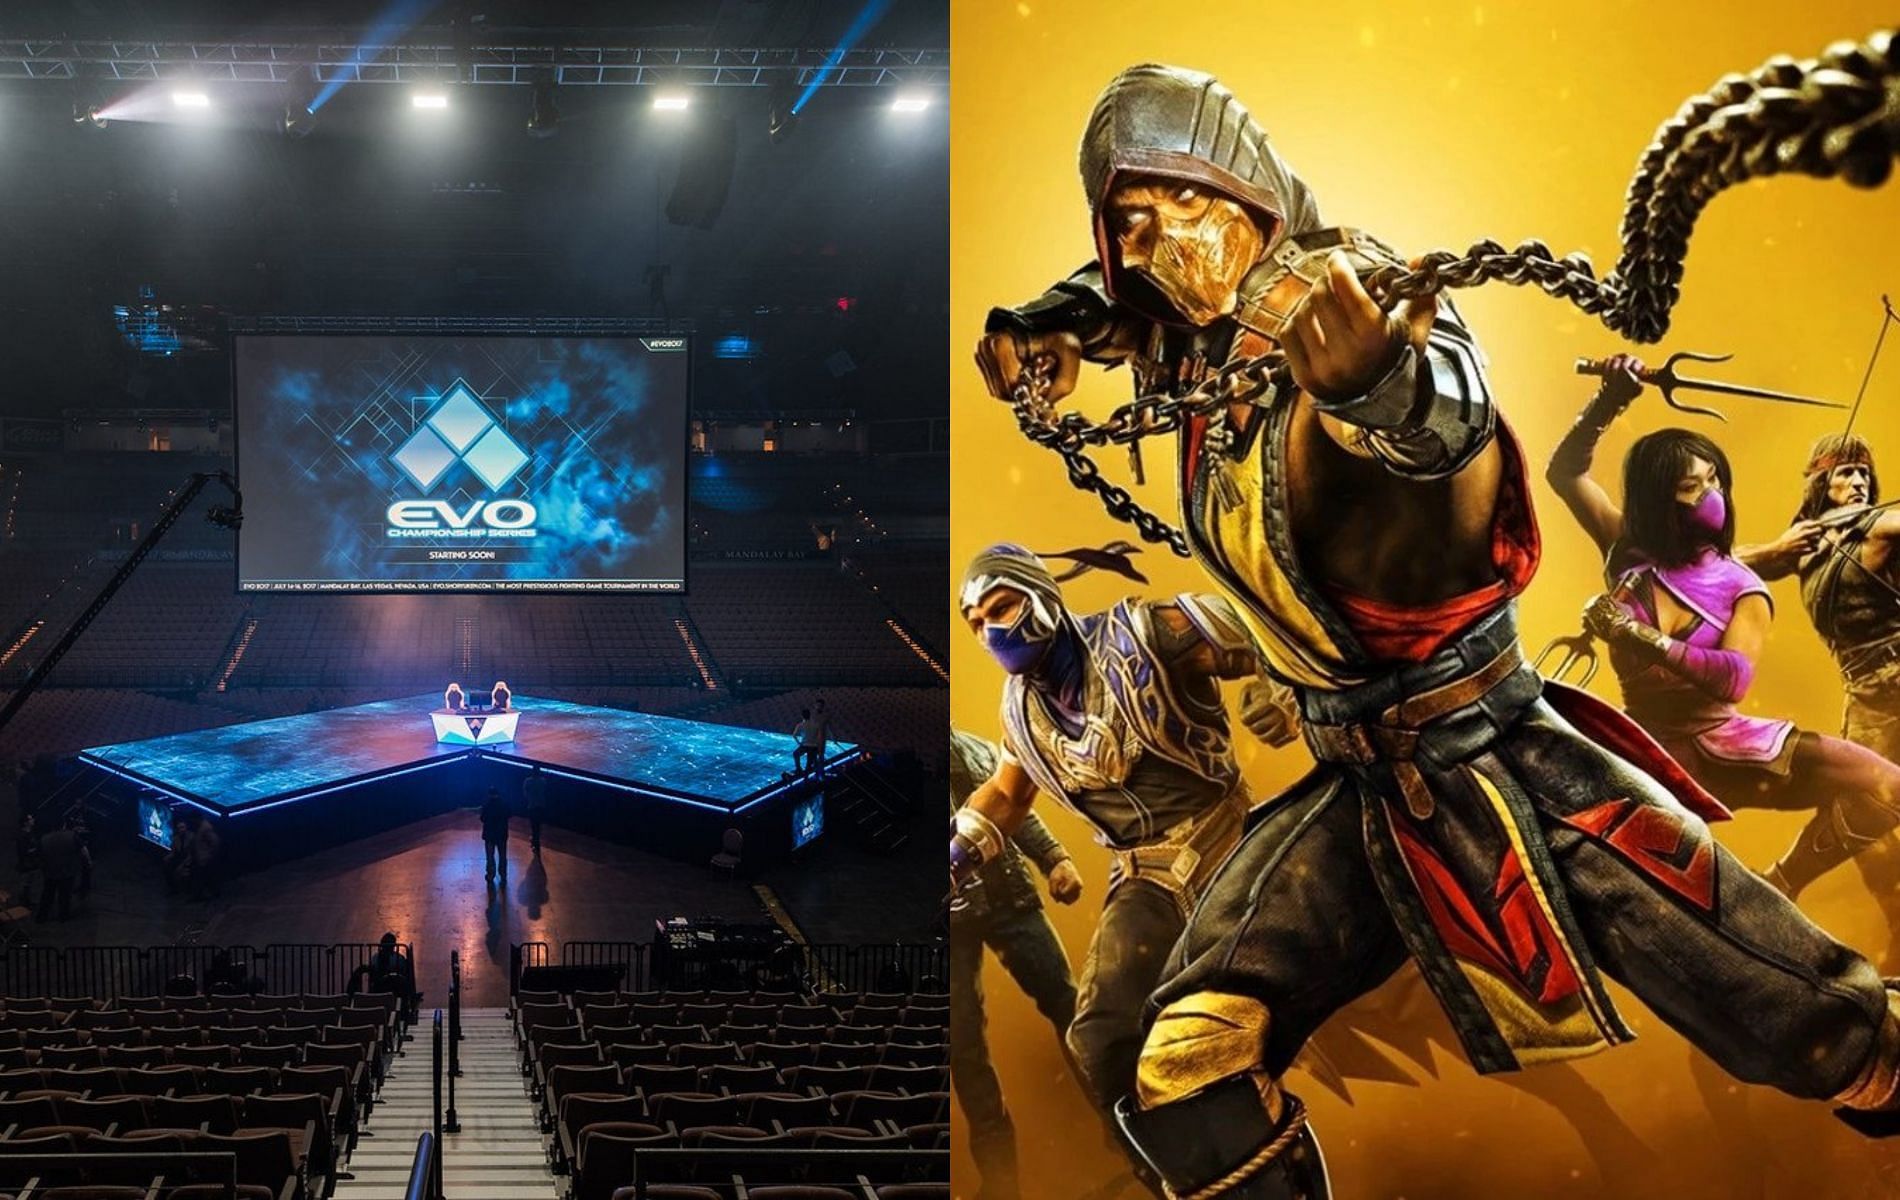 The latest gorefest between competitors in the Mortal Kombat 11 Grand Finals is a sight to behold (Images via Sony/Warner Bros. Games)